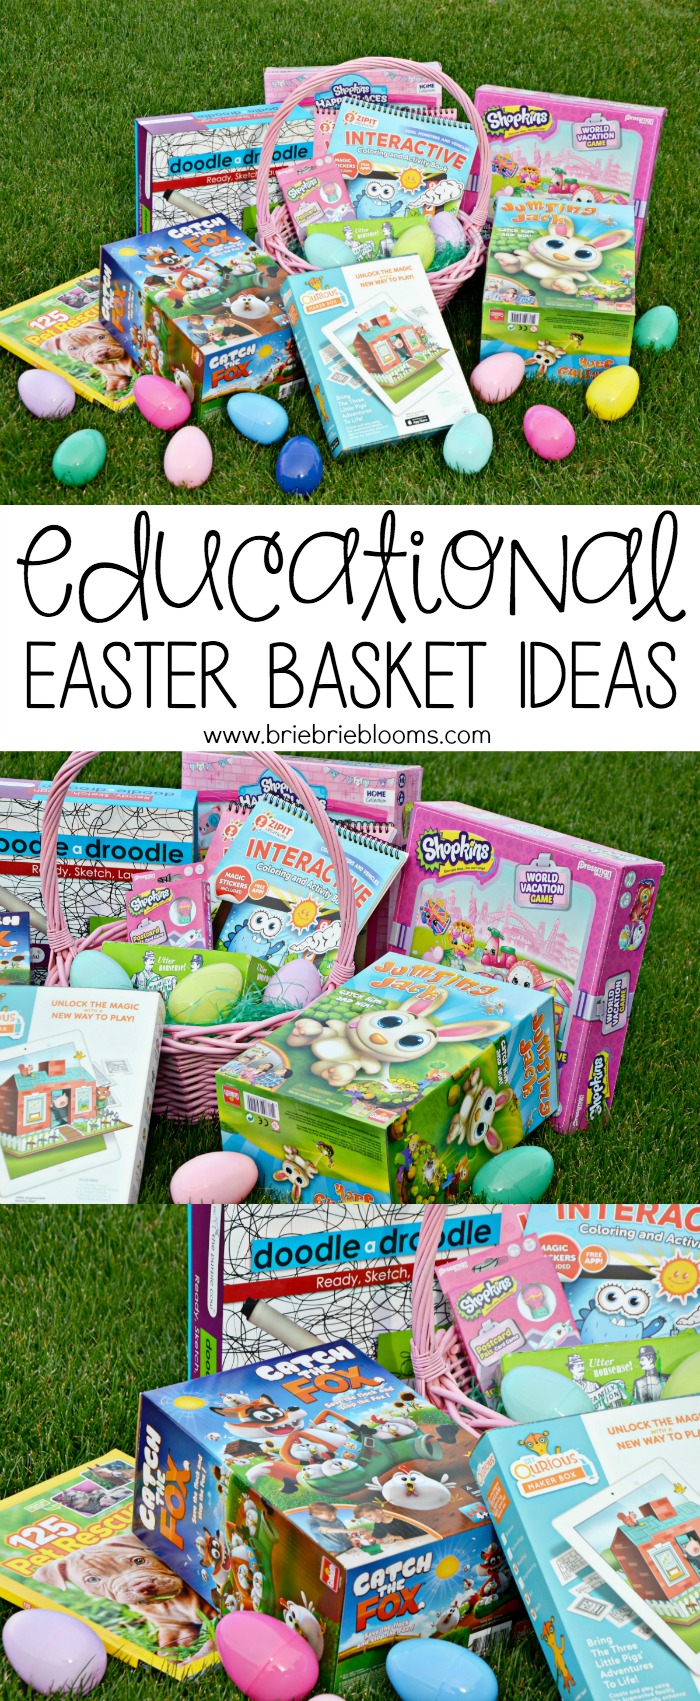 Encourage family time together with these educational Easter basket ideas.